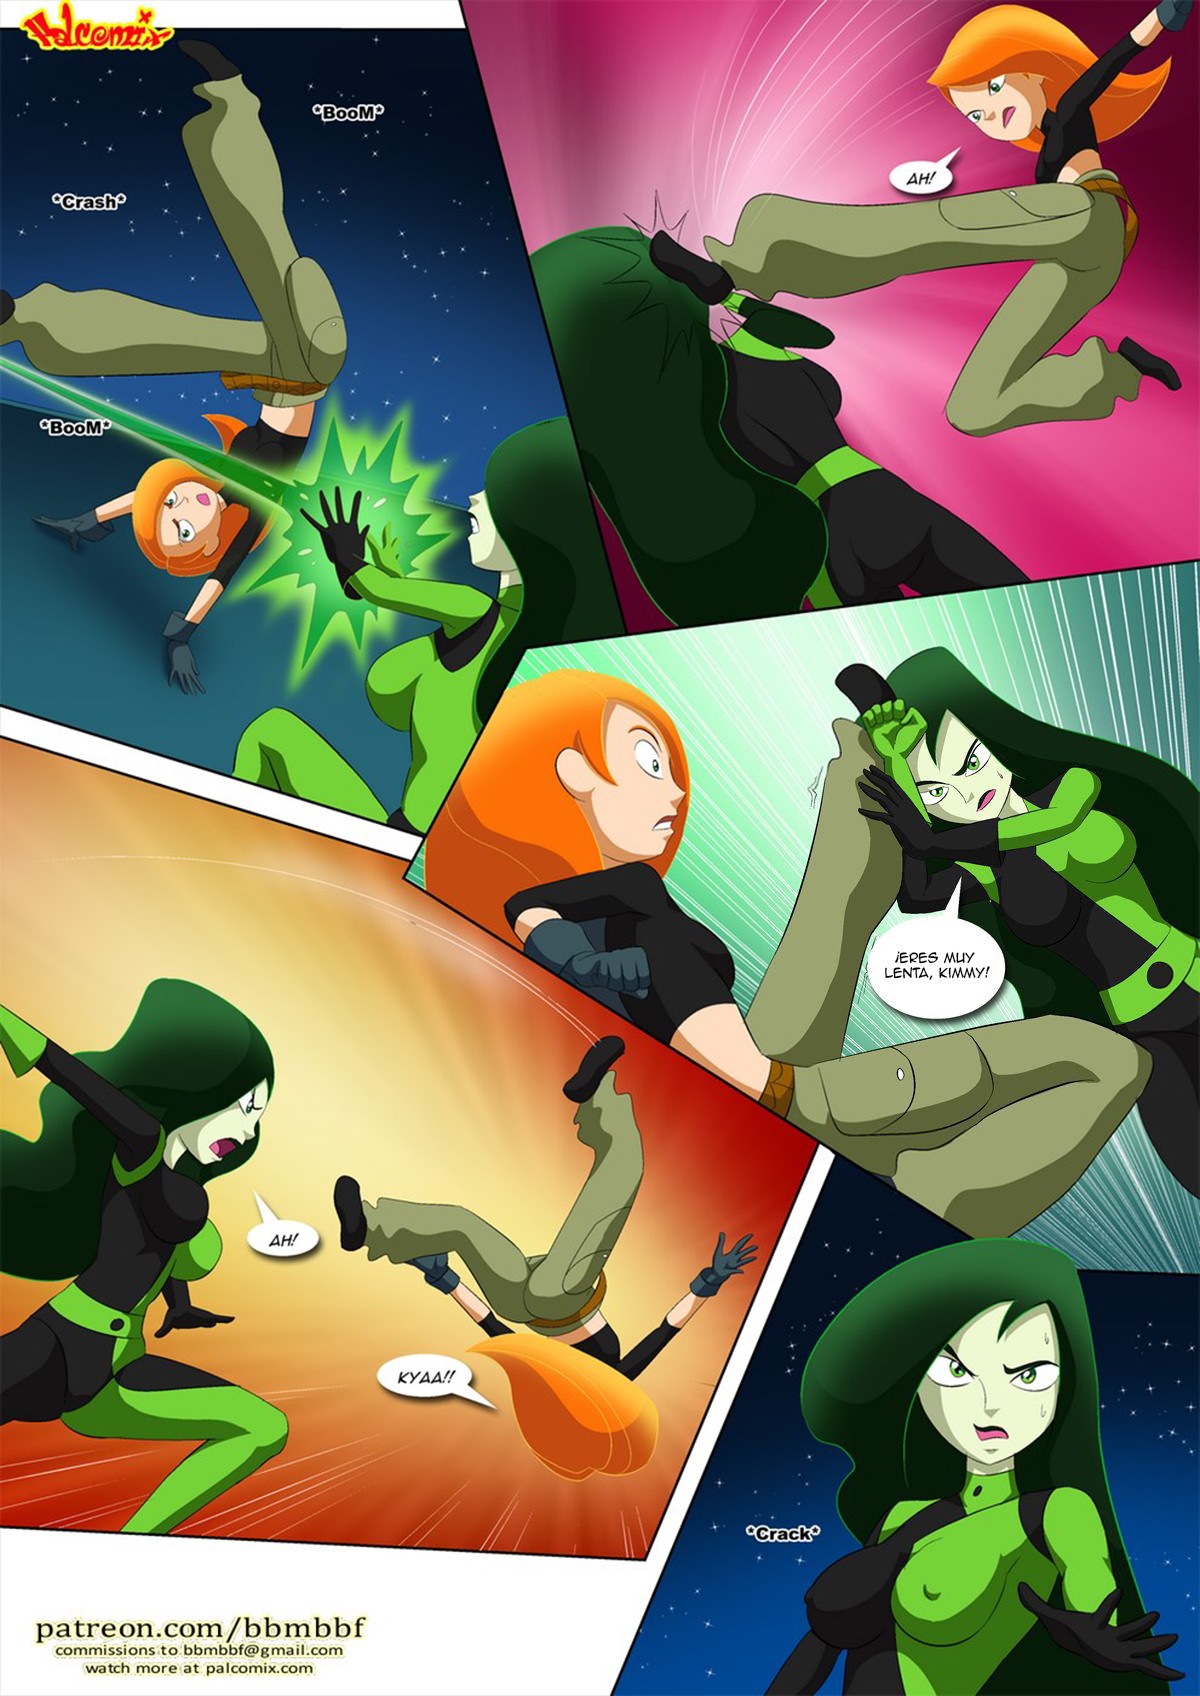 Shego’s Pet - c154a40c4dd6a37bc2d0274d67647643